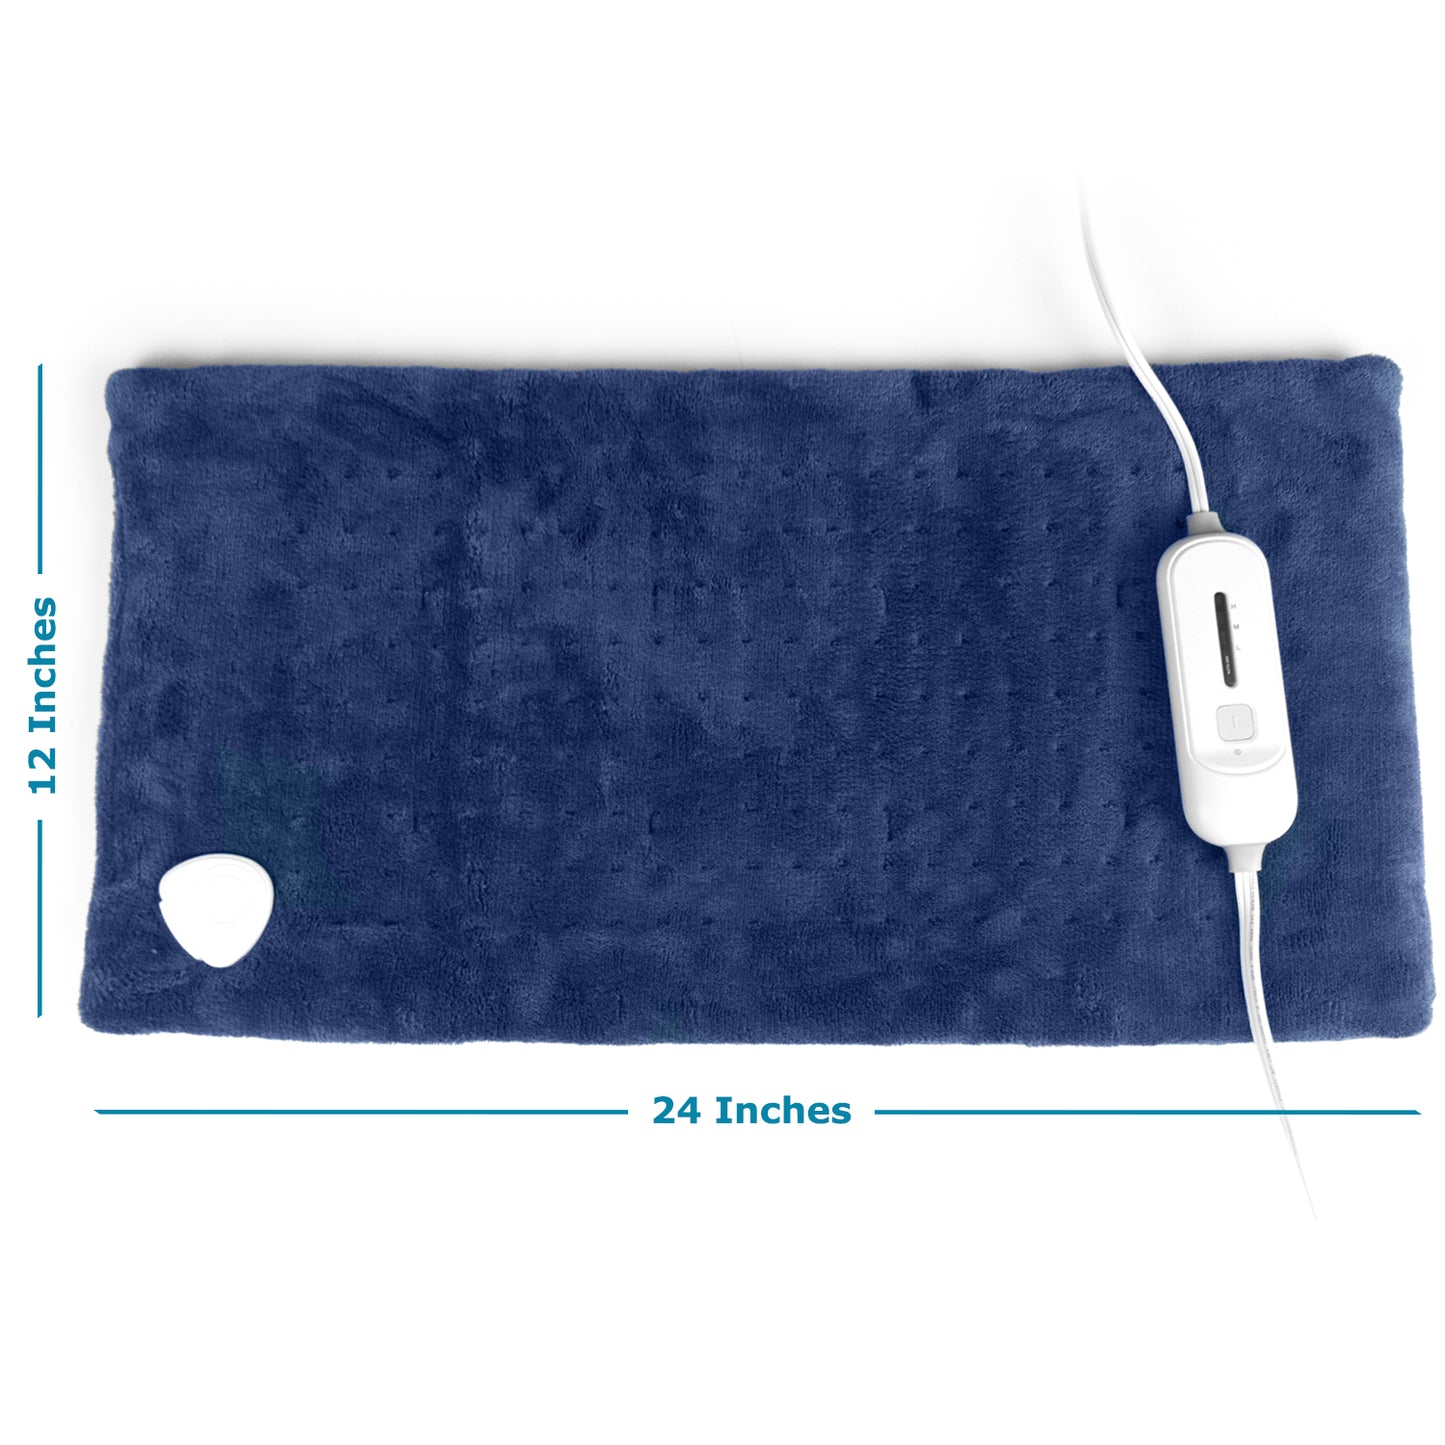 Dr Relief by SUNAID Full Back Heating Pad Fast Heating Wrap with Auto Shut Off for Back, Neck and Shoulder, Abdomen, Waist Pain Relief, Dry/Moist Option (12"x24", Navy)